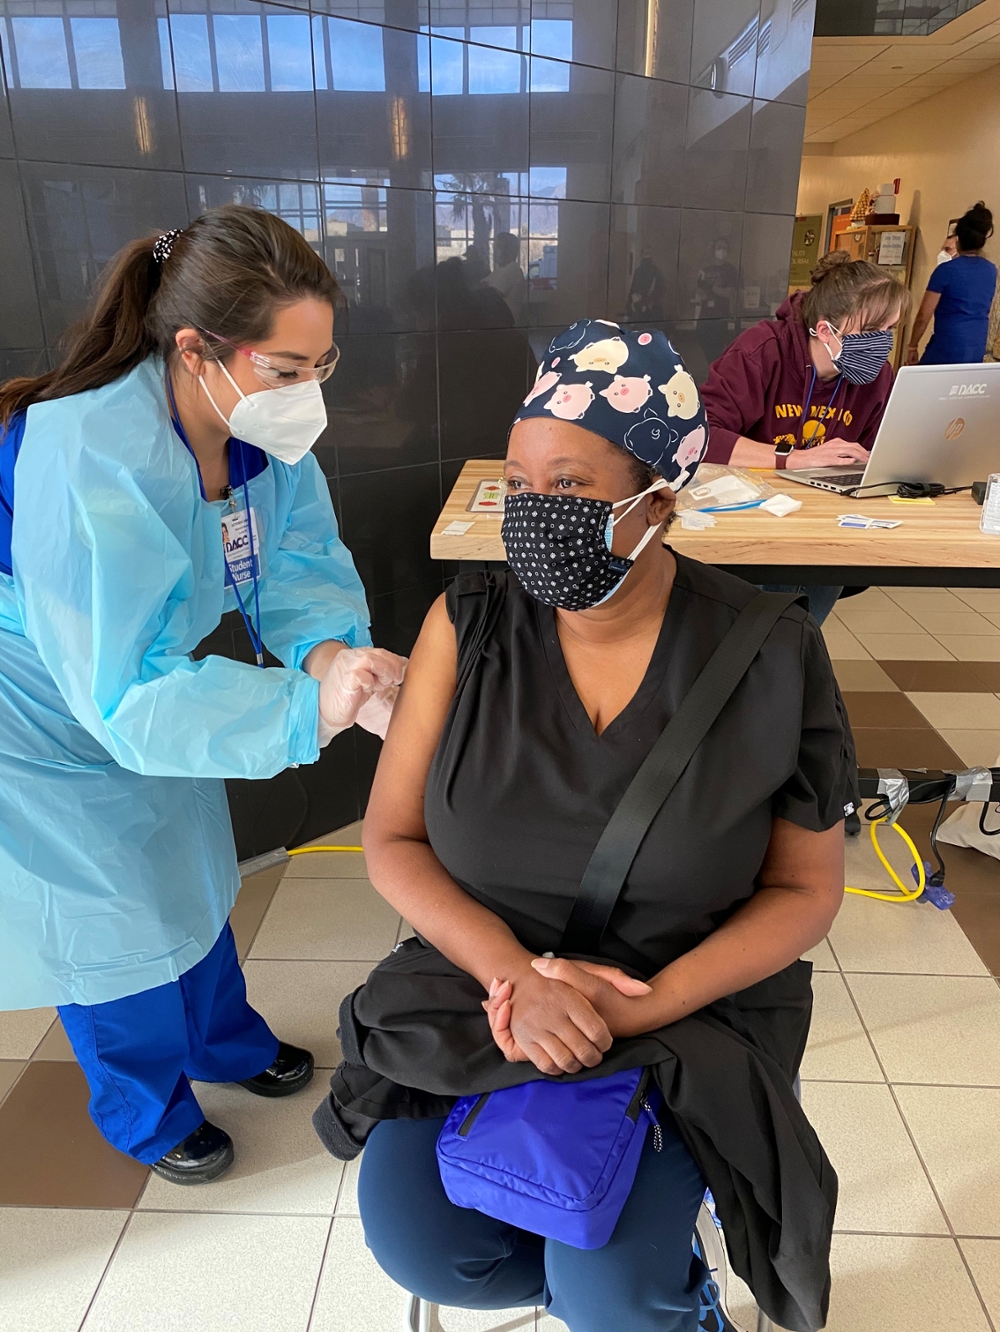 A DACC student nurse swabs her patient's right arm, preparing her for a shot.